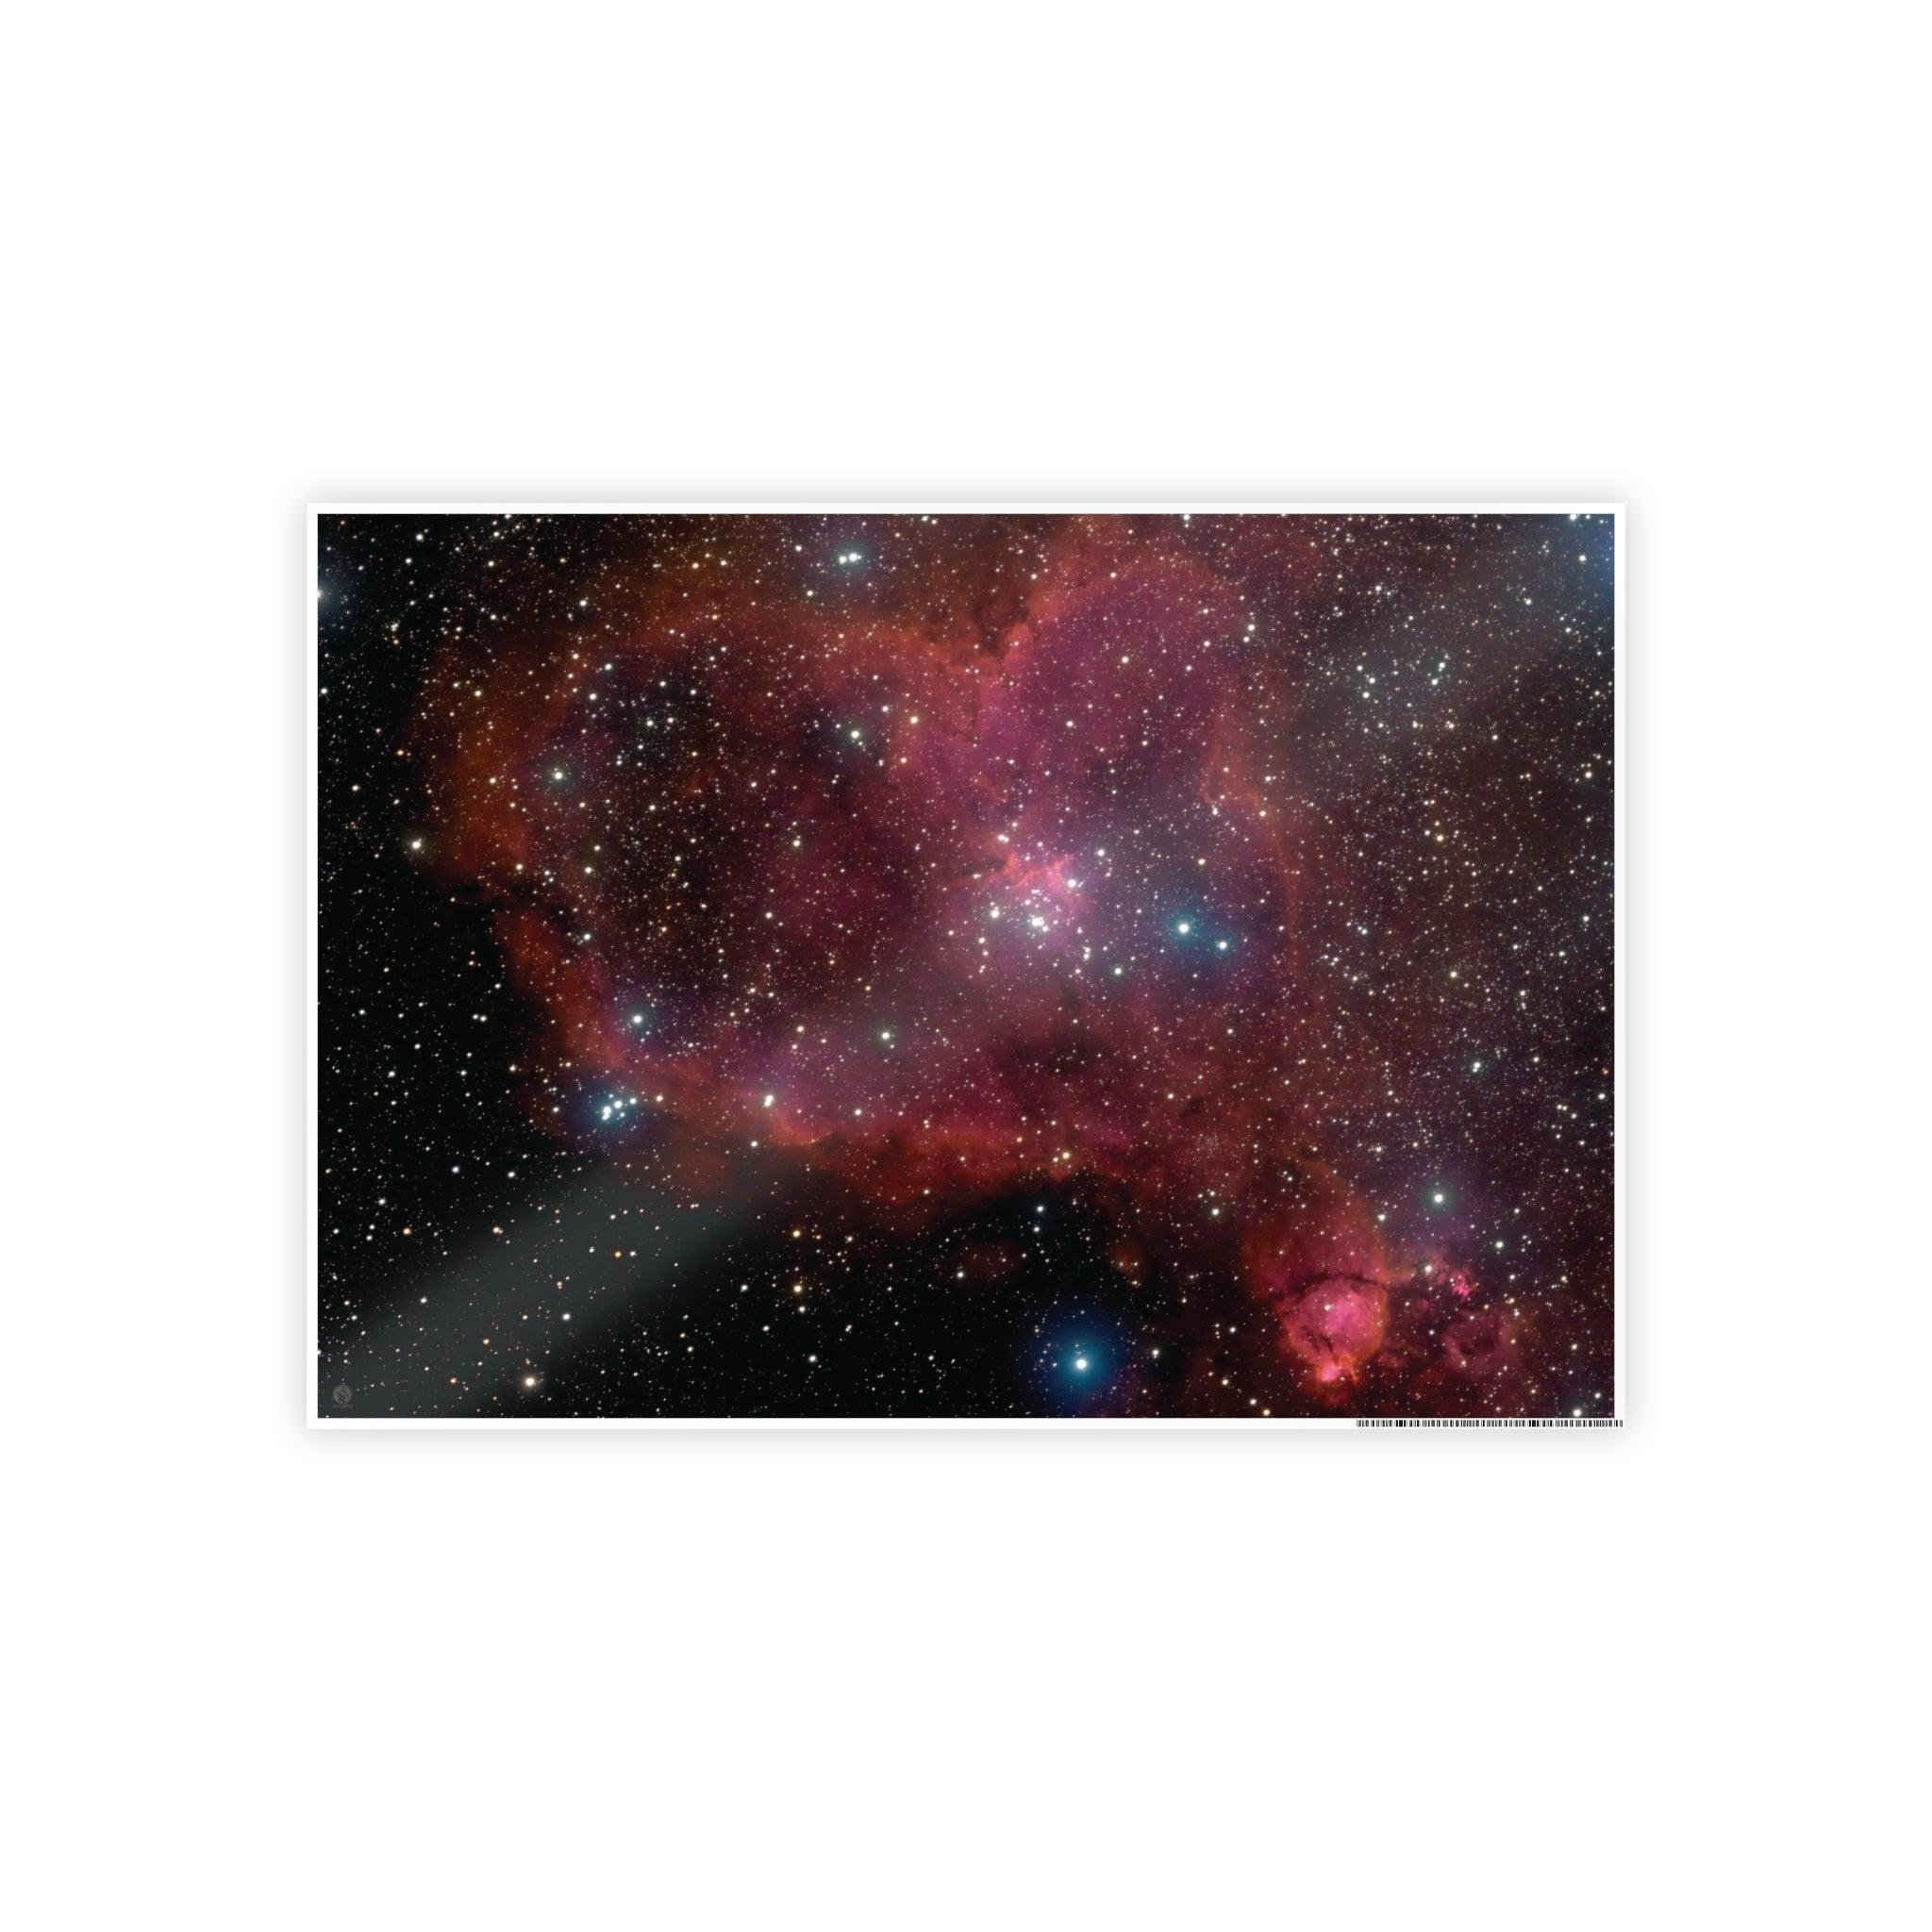 Poster of the Heart Nebula